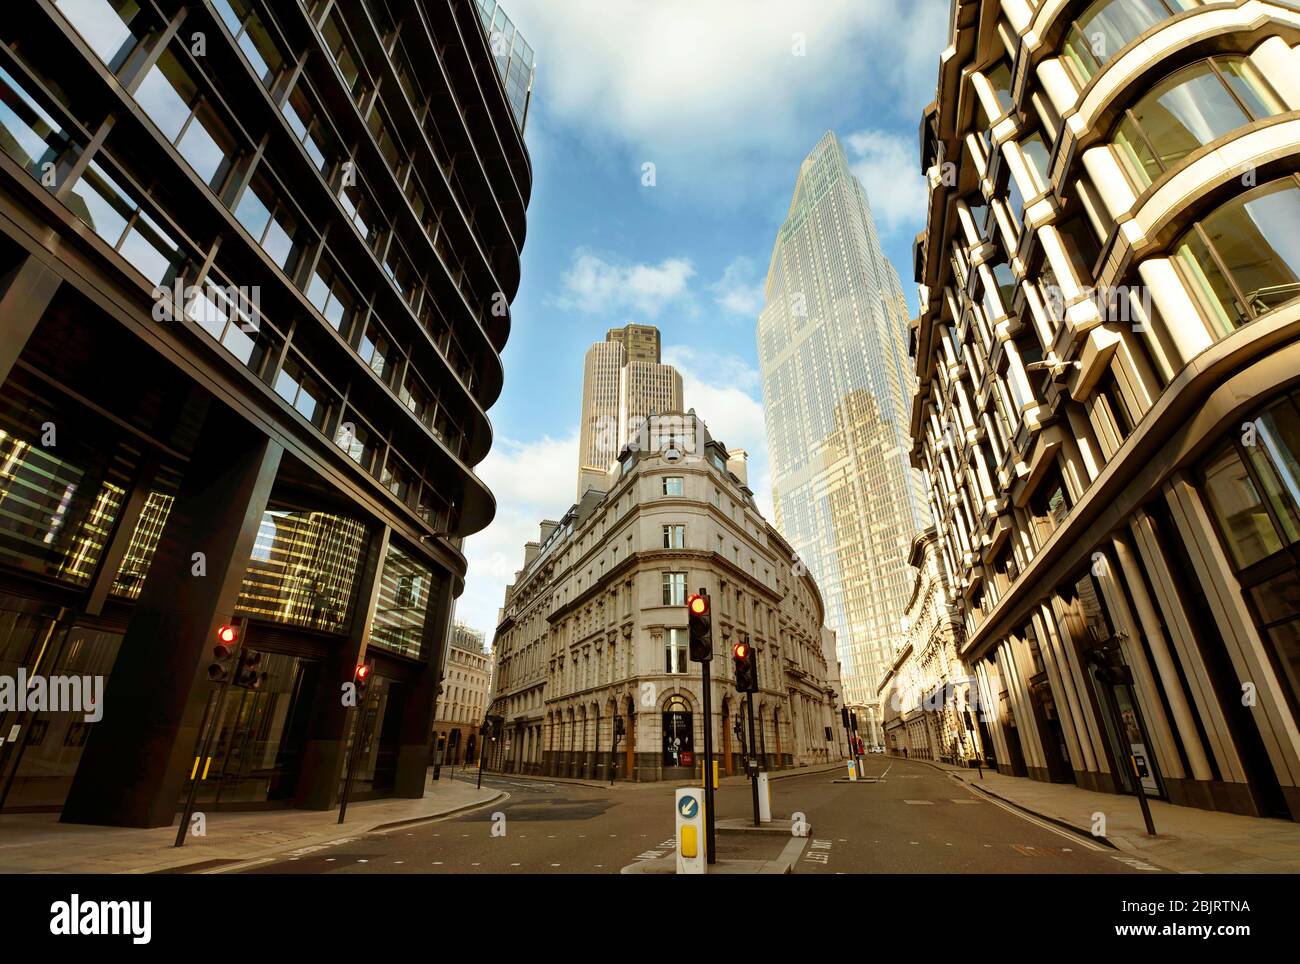 The empty City of London; Threadneedle Street and Old Broad St. Wide angle architectural views on day 7 of the lockdown. London, UK. Mar 2020 Stock Photo